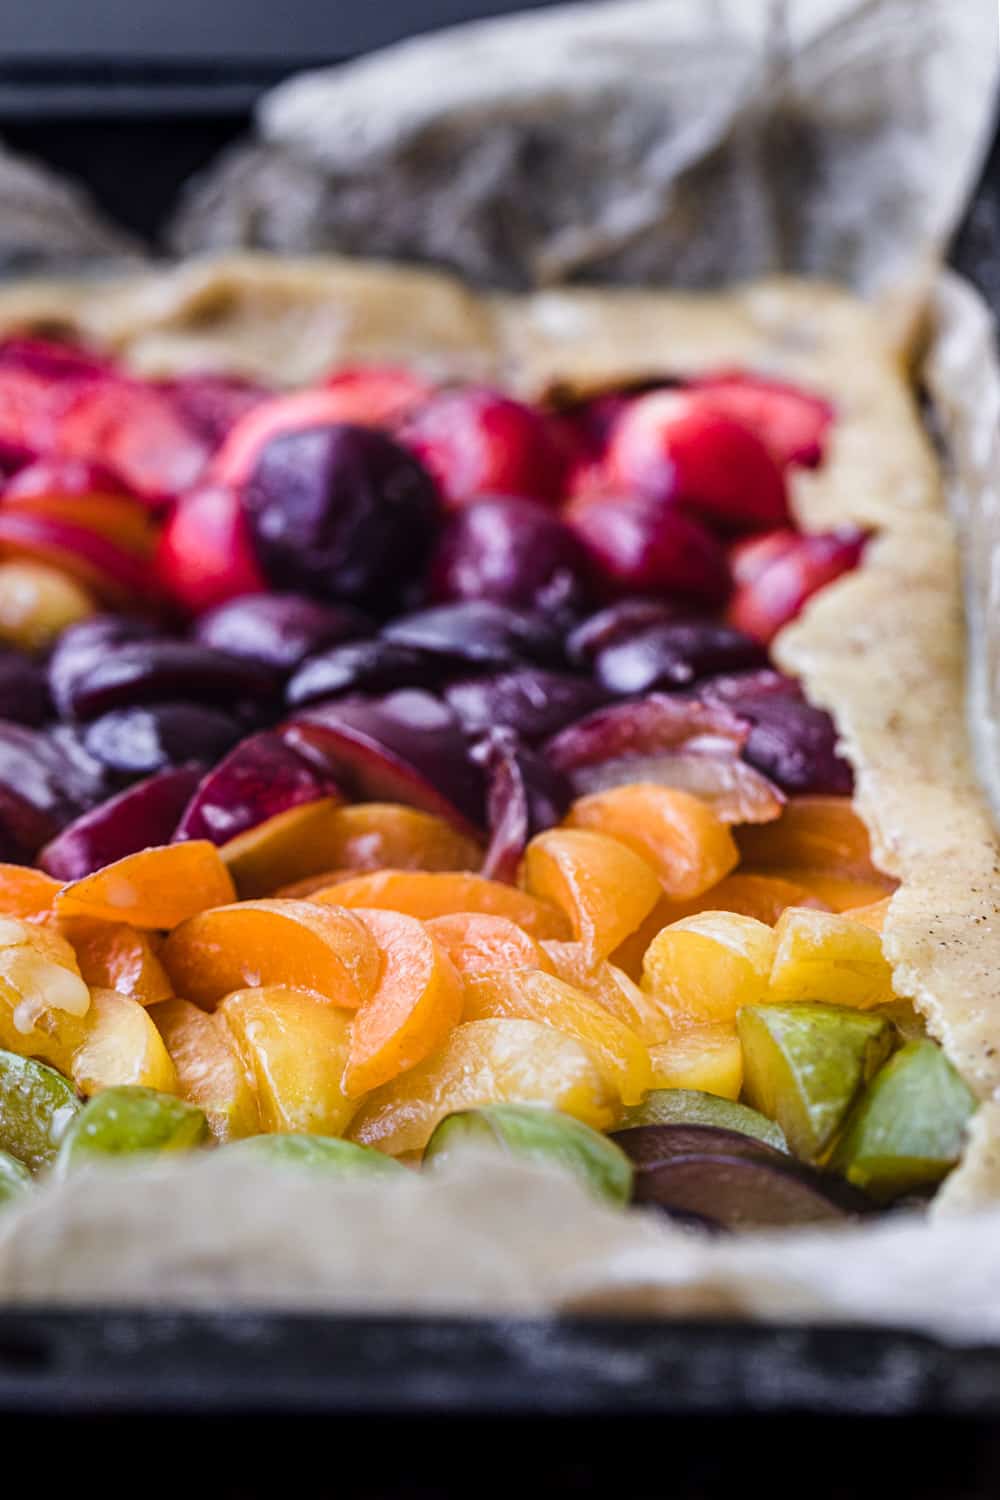 side angle and up close stone fruit galette with green, yellow, orange, purple and red varieties of stone fruits.